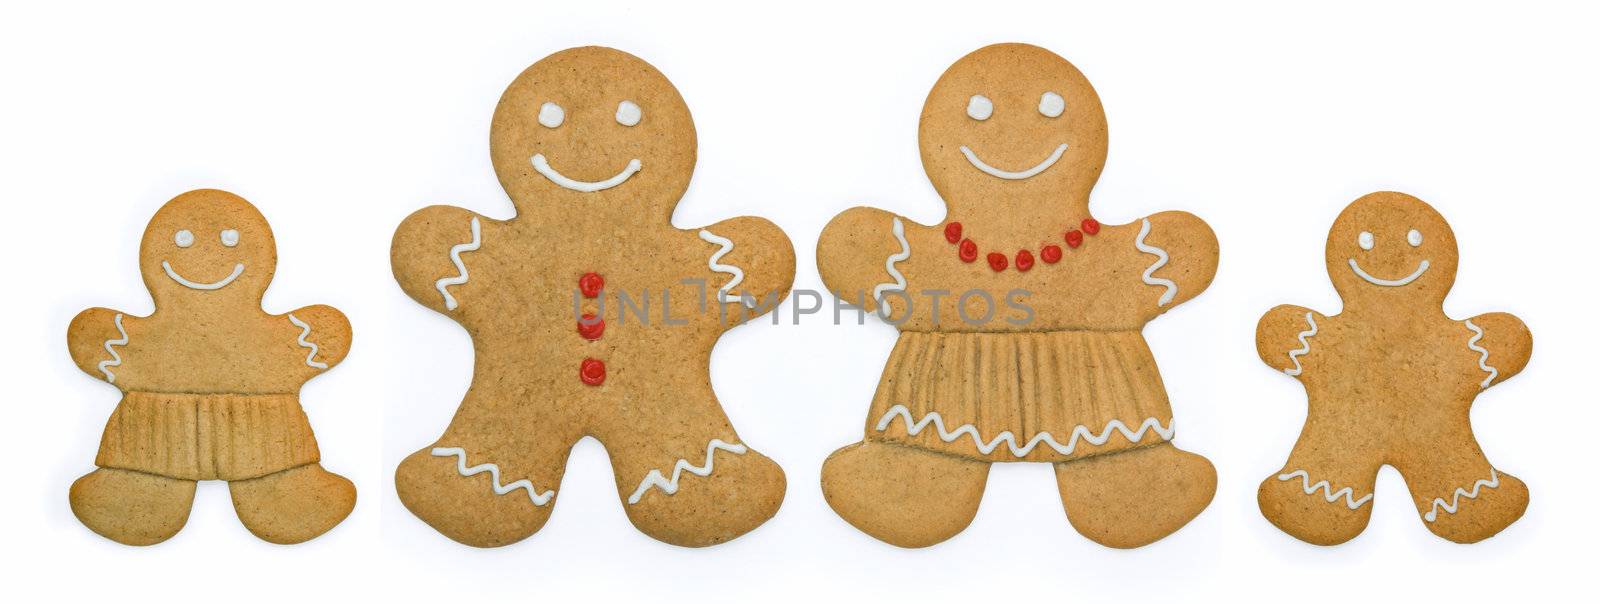 Gingerbread family by RuthBlack